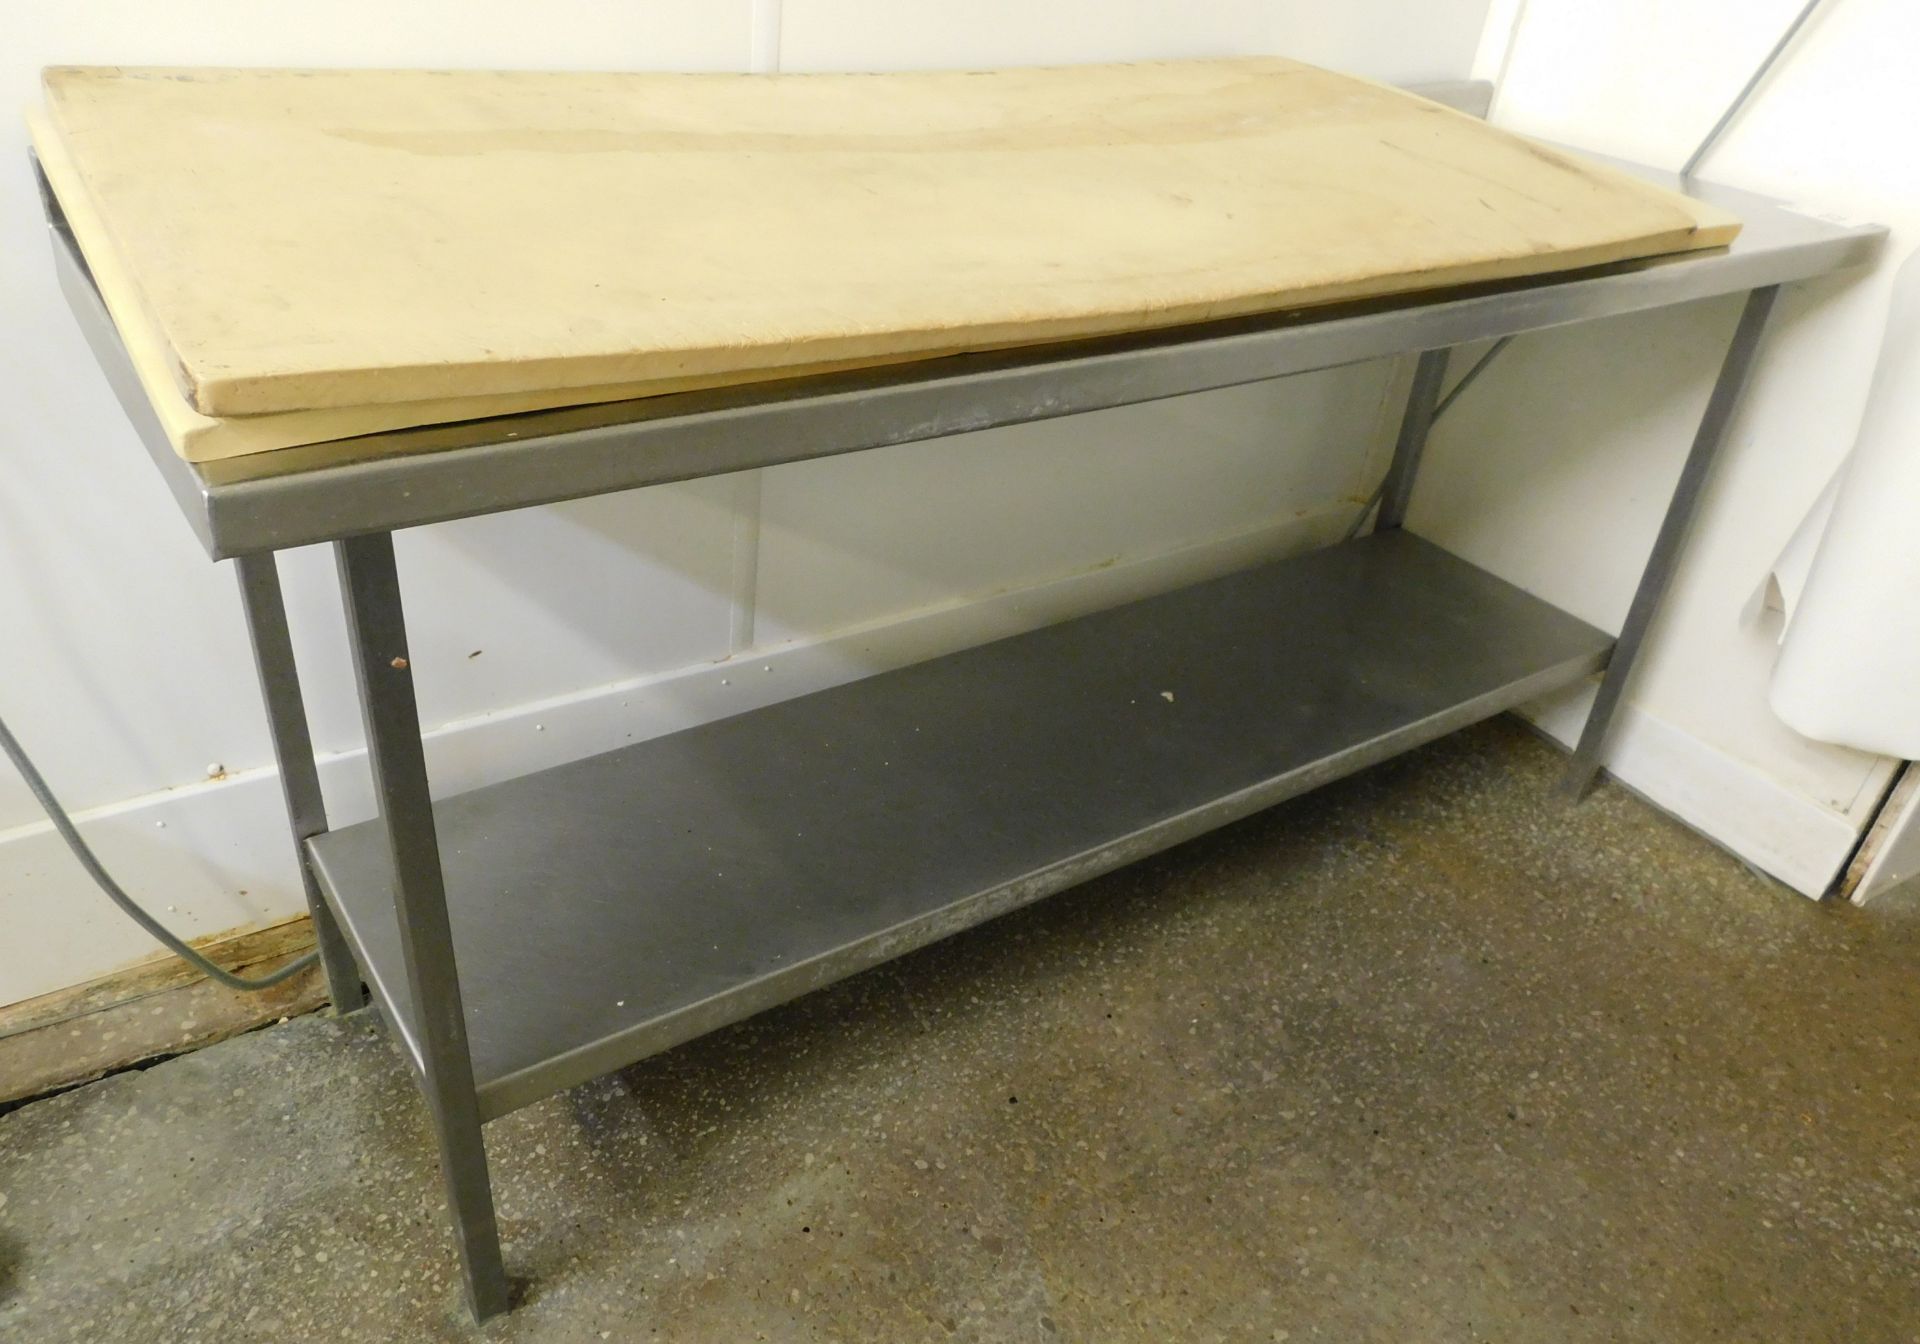 Stainless Steel Preparation Table (180cm W x 60cm D x 83cm H Approx.) with 2 Chopping Boards (